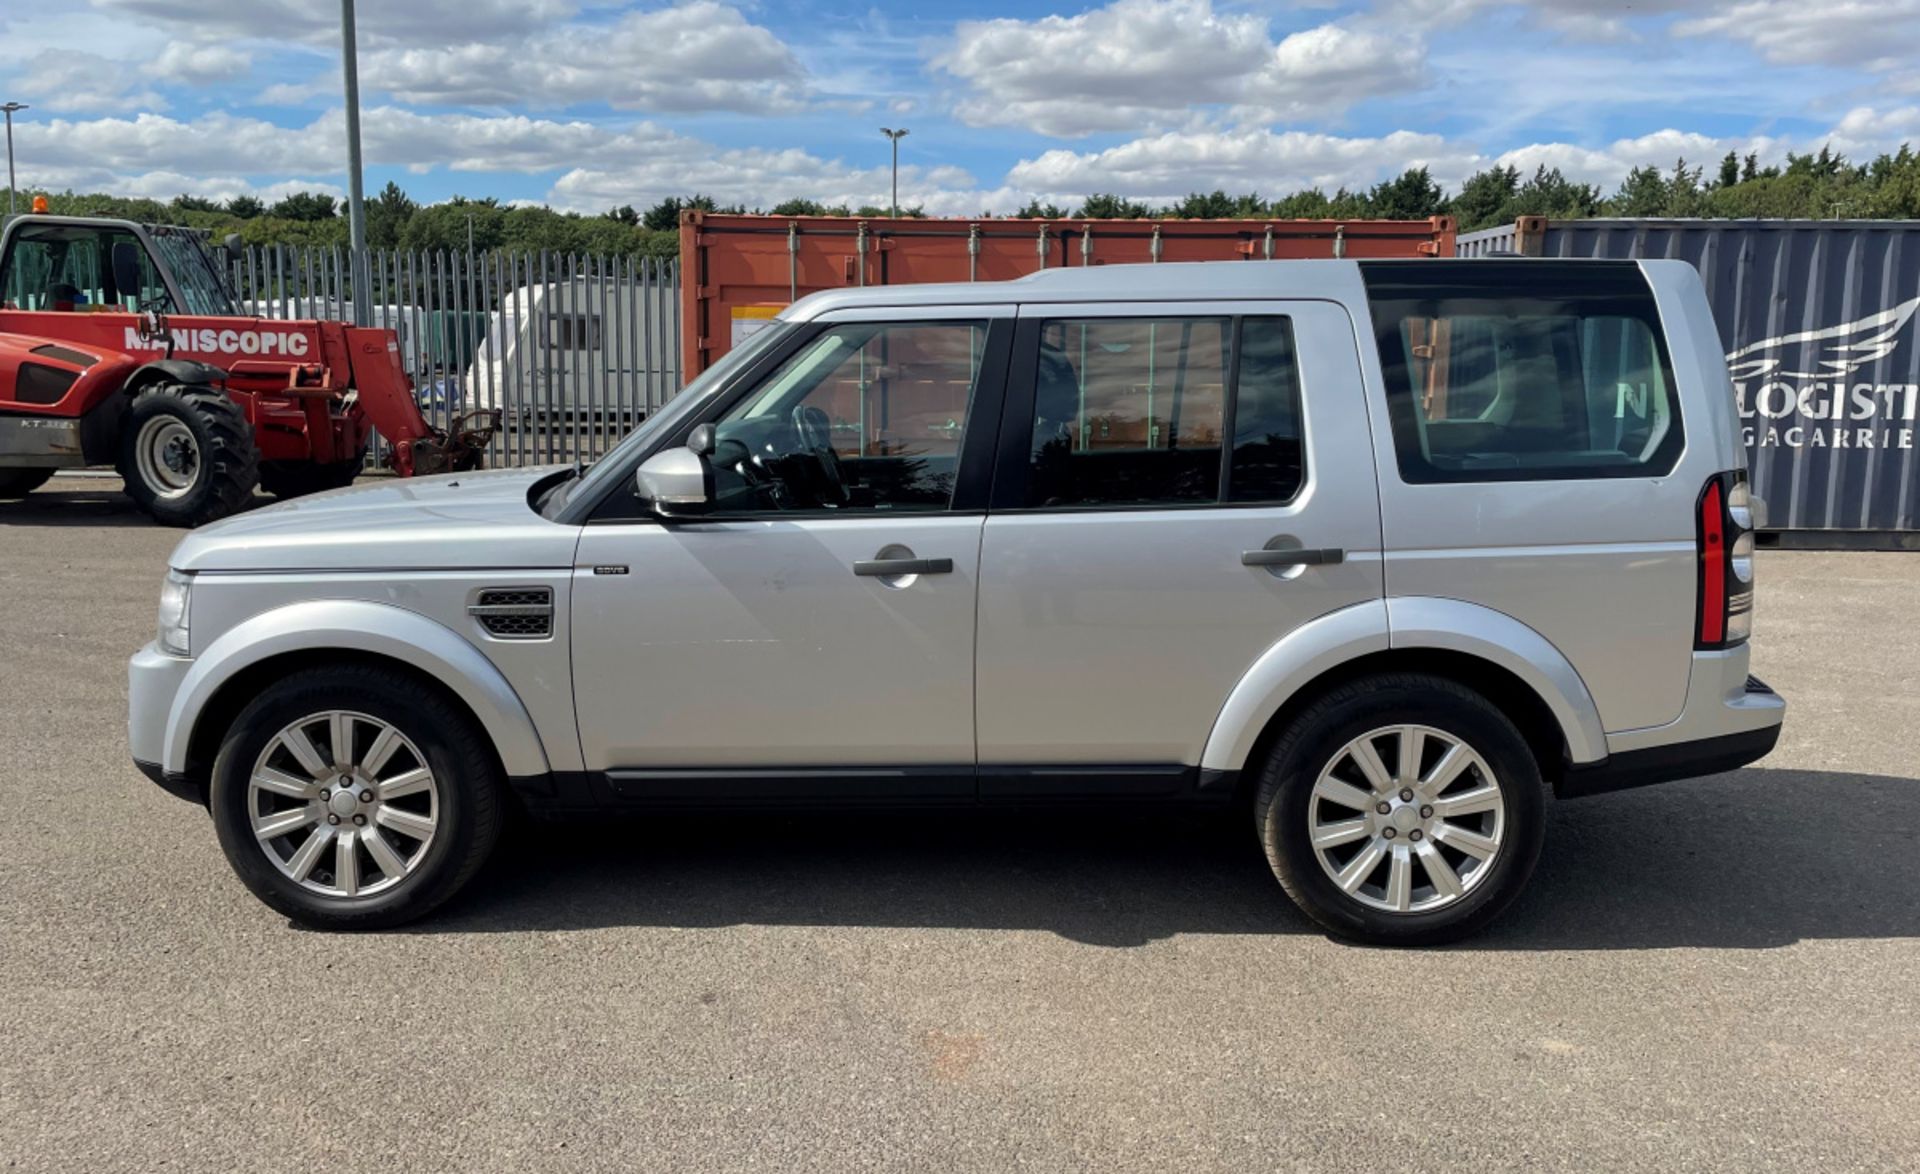 Land Rover Discovery SDV6 SE - 2015 - Automatic - Diesel - 2993cc 6 Cylinder engine - LJ15 LTE - Image 2 of 29